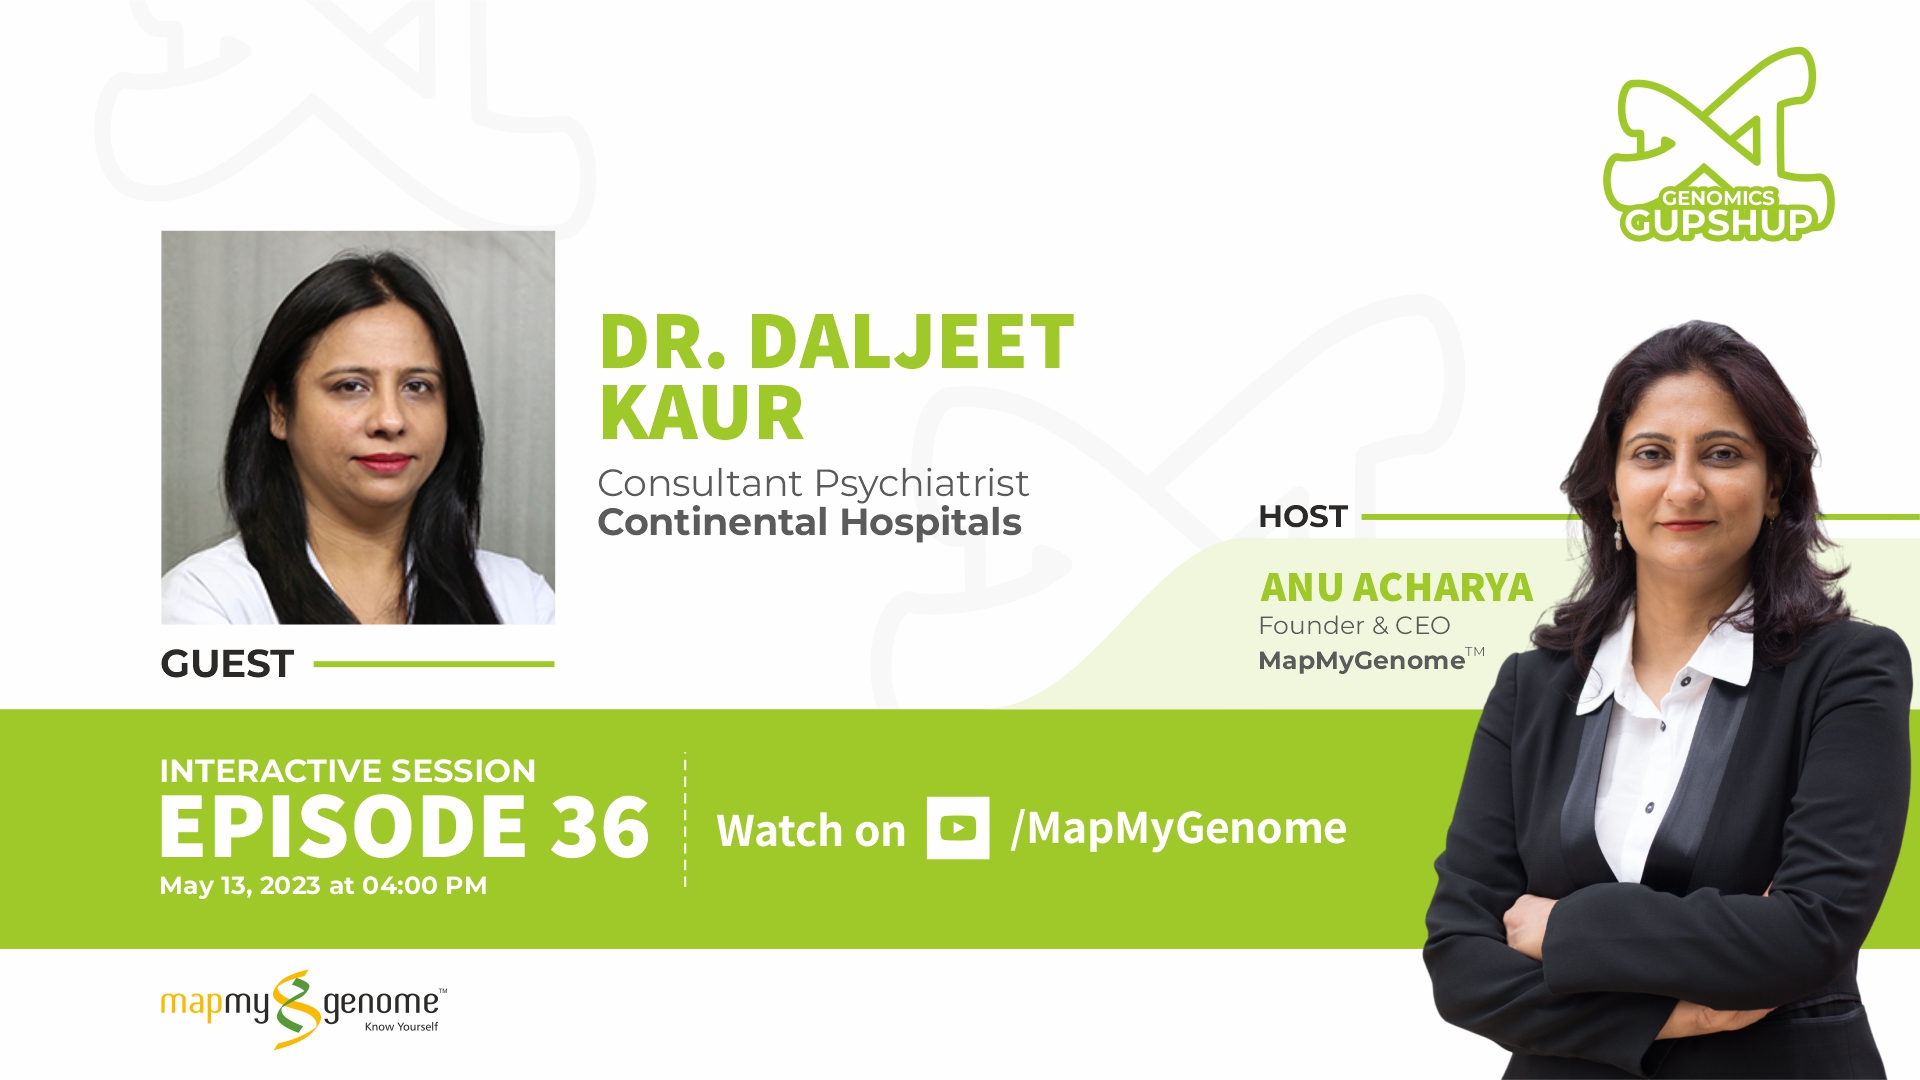 How Genomics Can Improve Your Mental Health: A Conversation with Dr. Daljeet Kaur